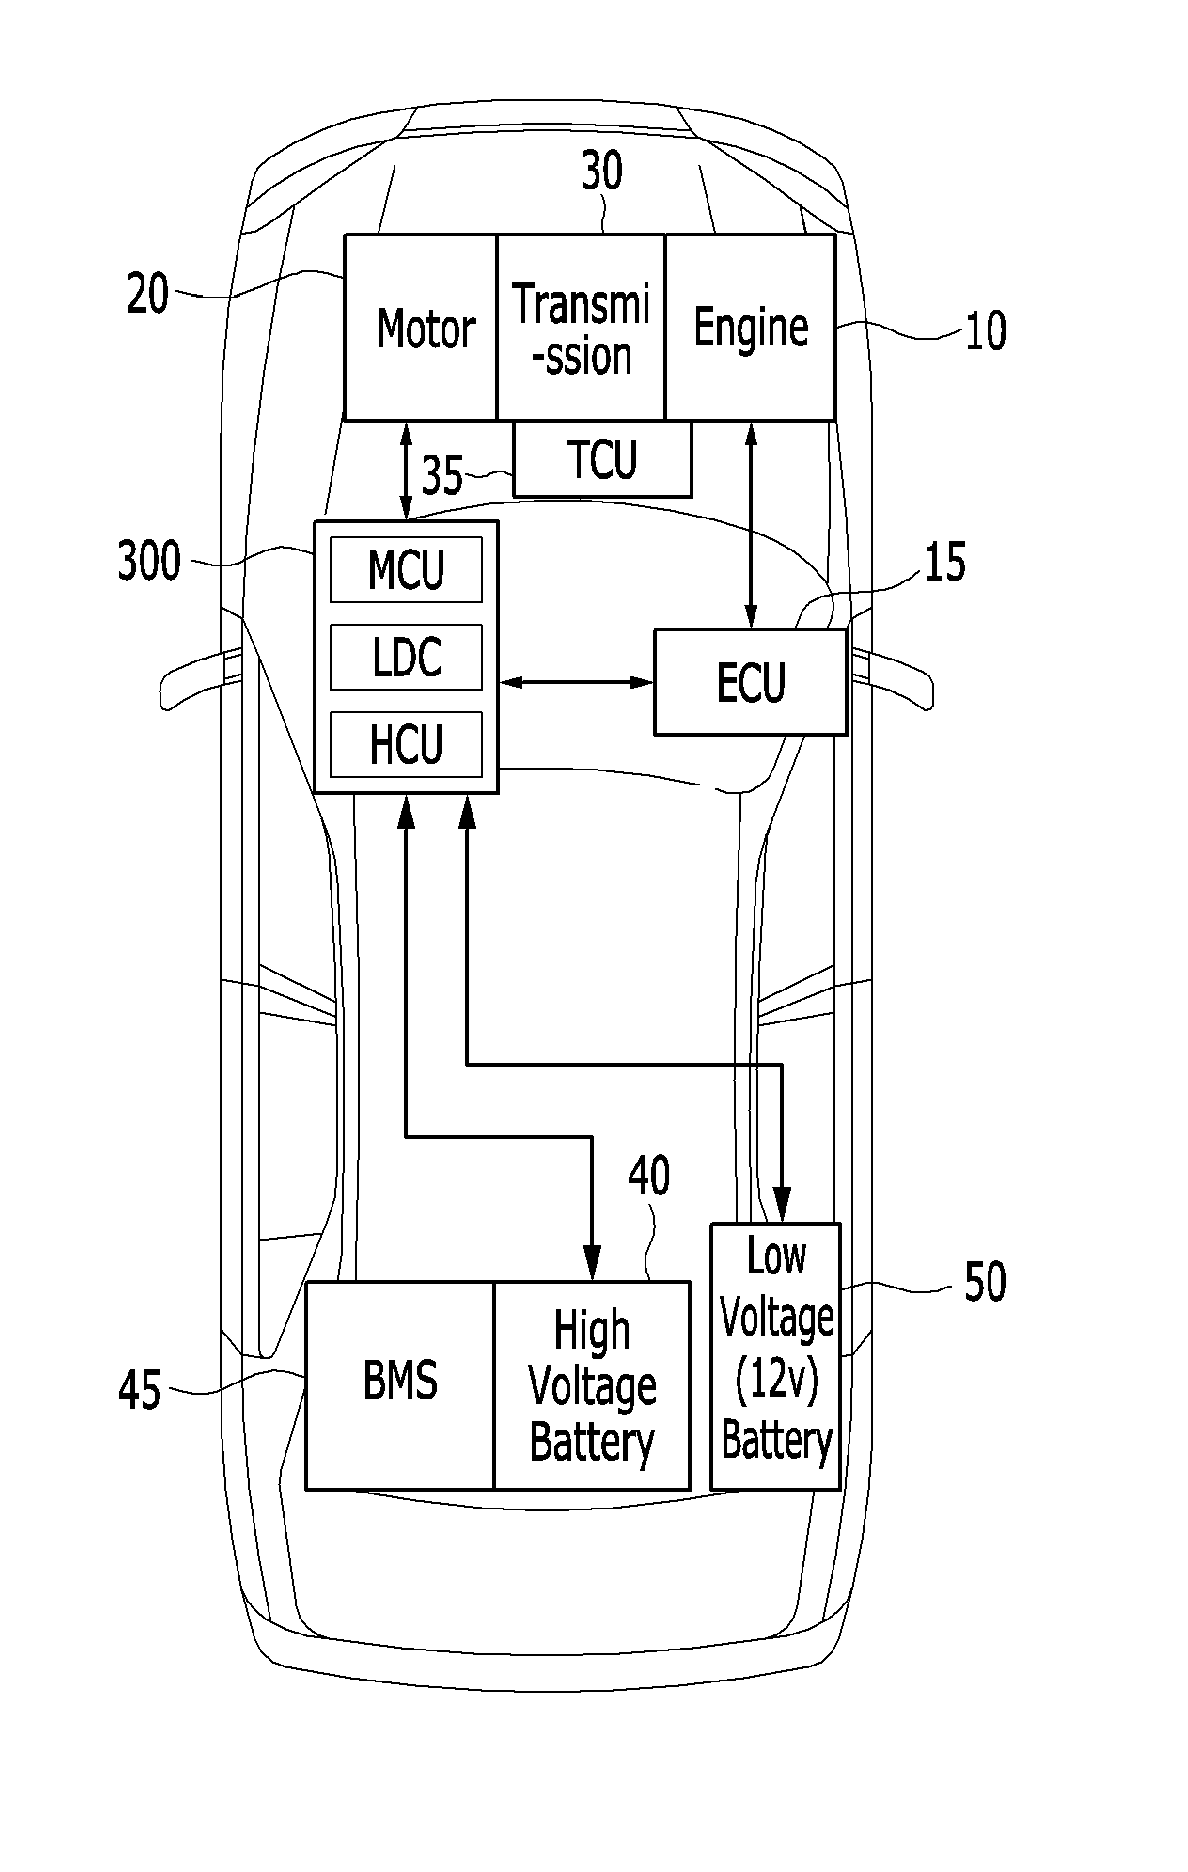 Integrated electronic power control unit of environmentally-friendly vehicle